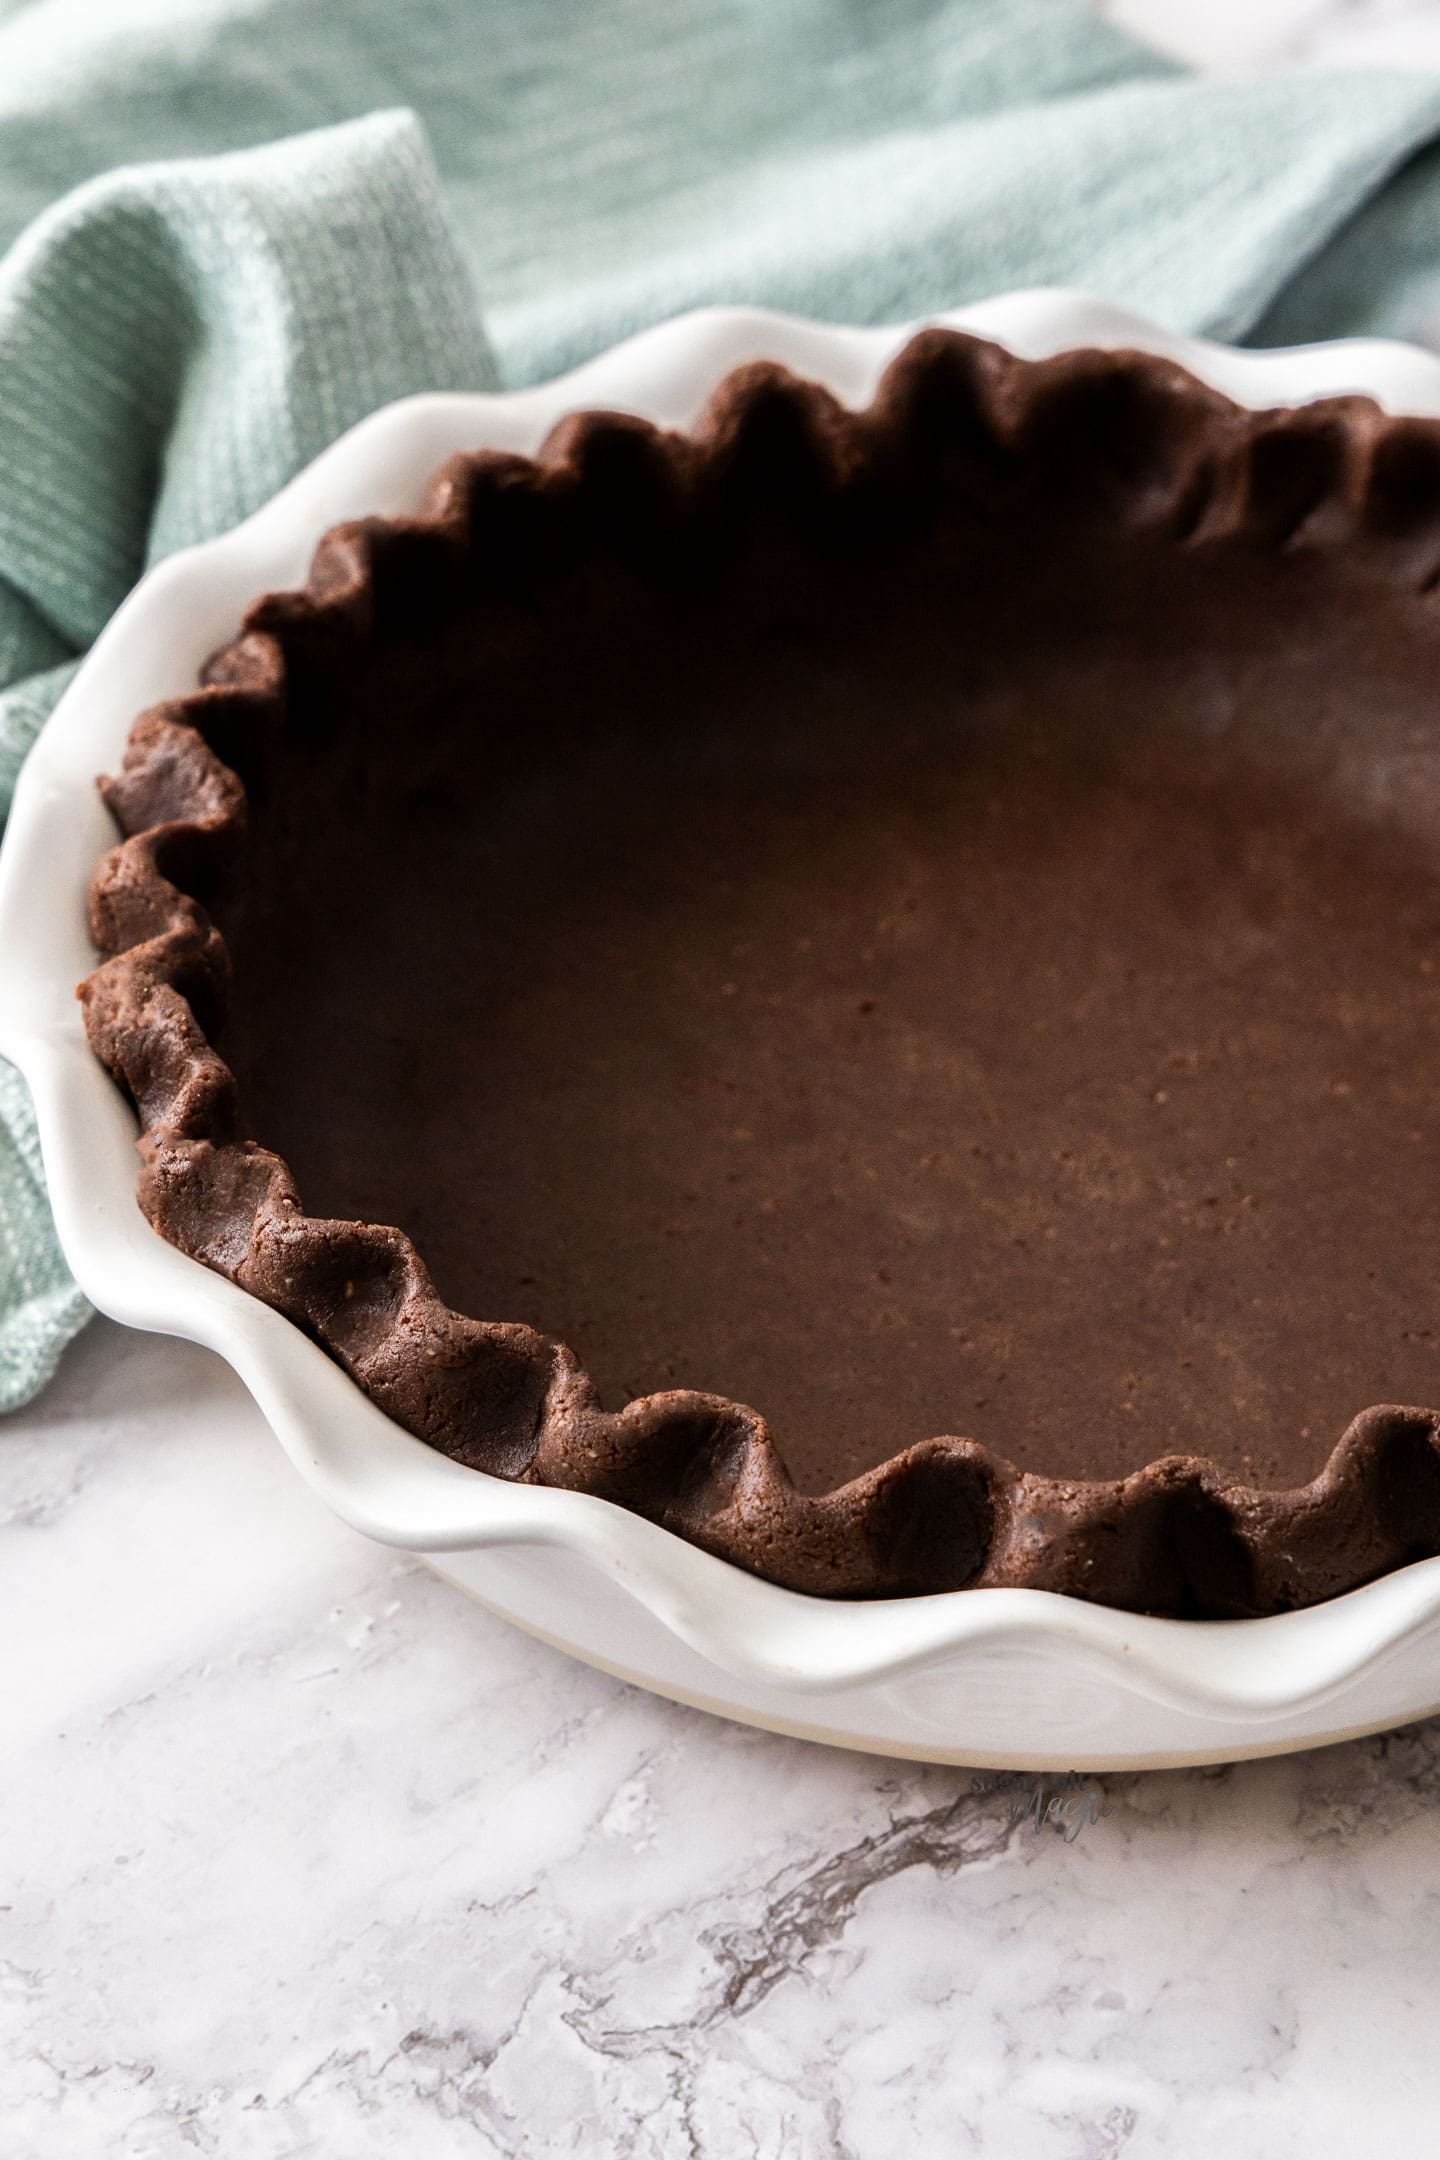 An unbaked chocolate pie crust in a white pie dish.